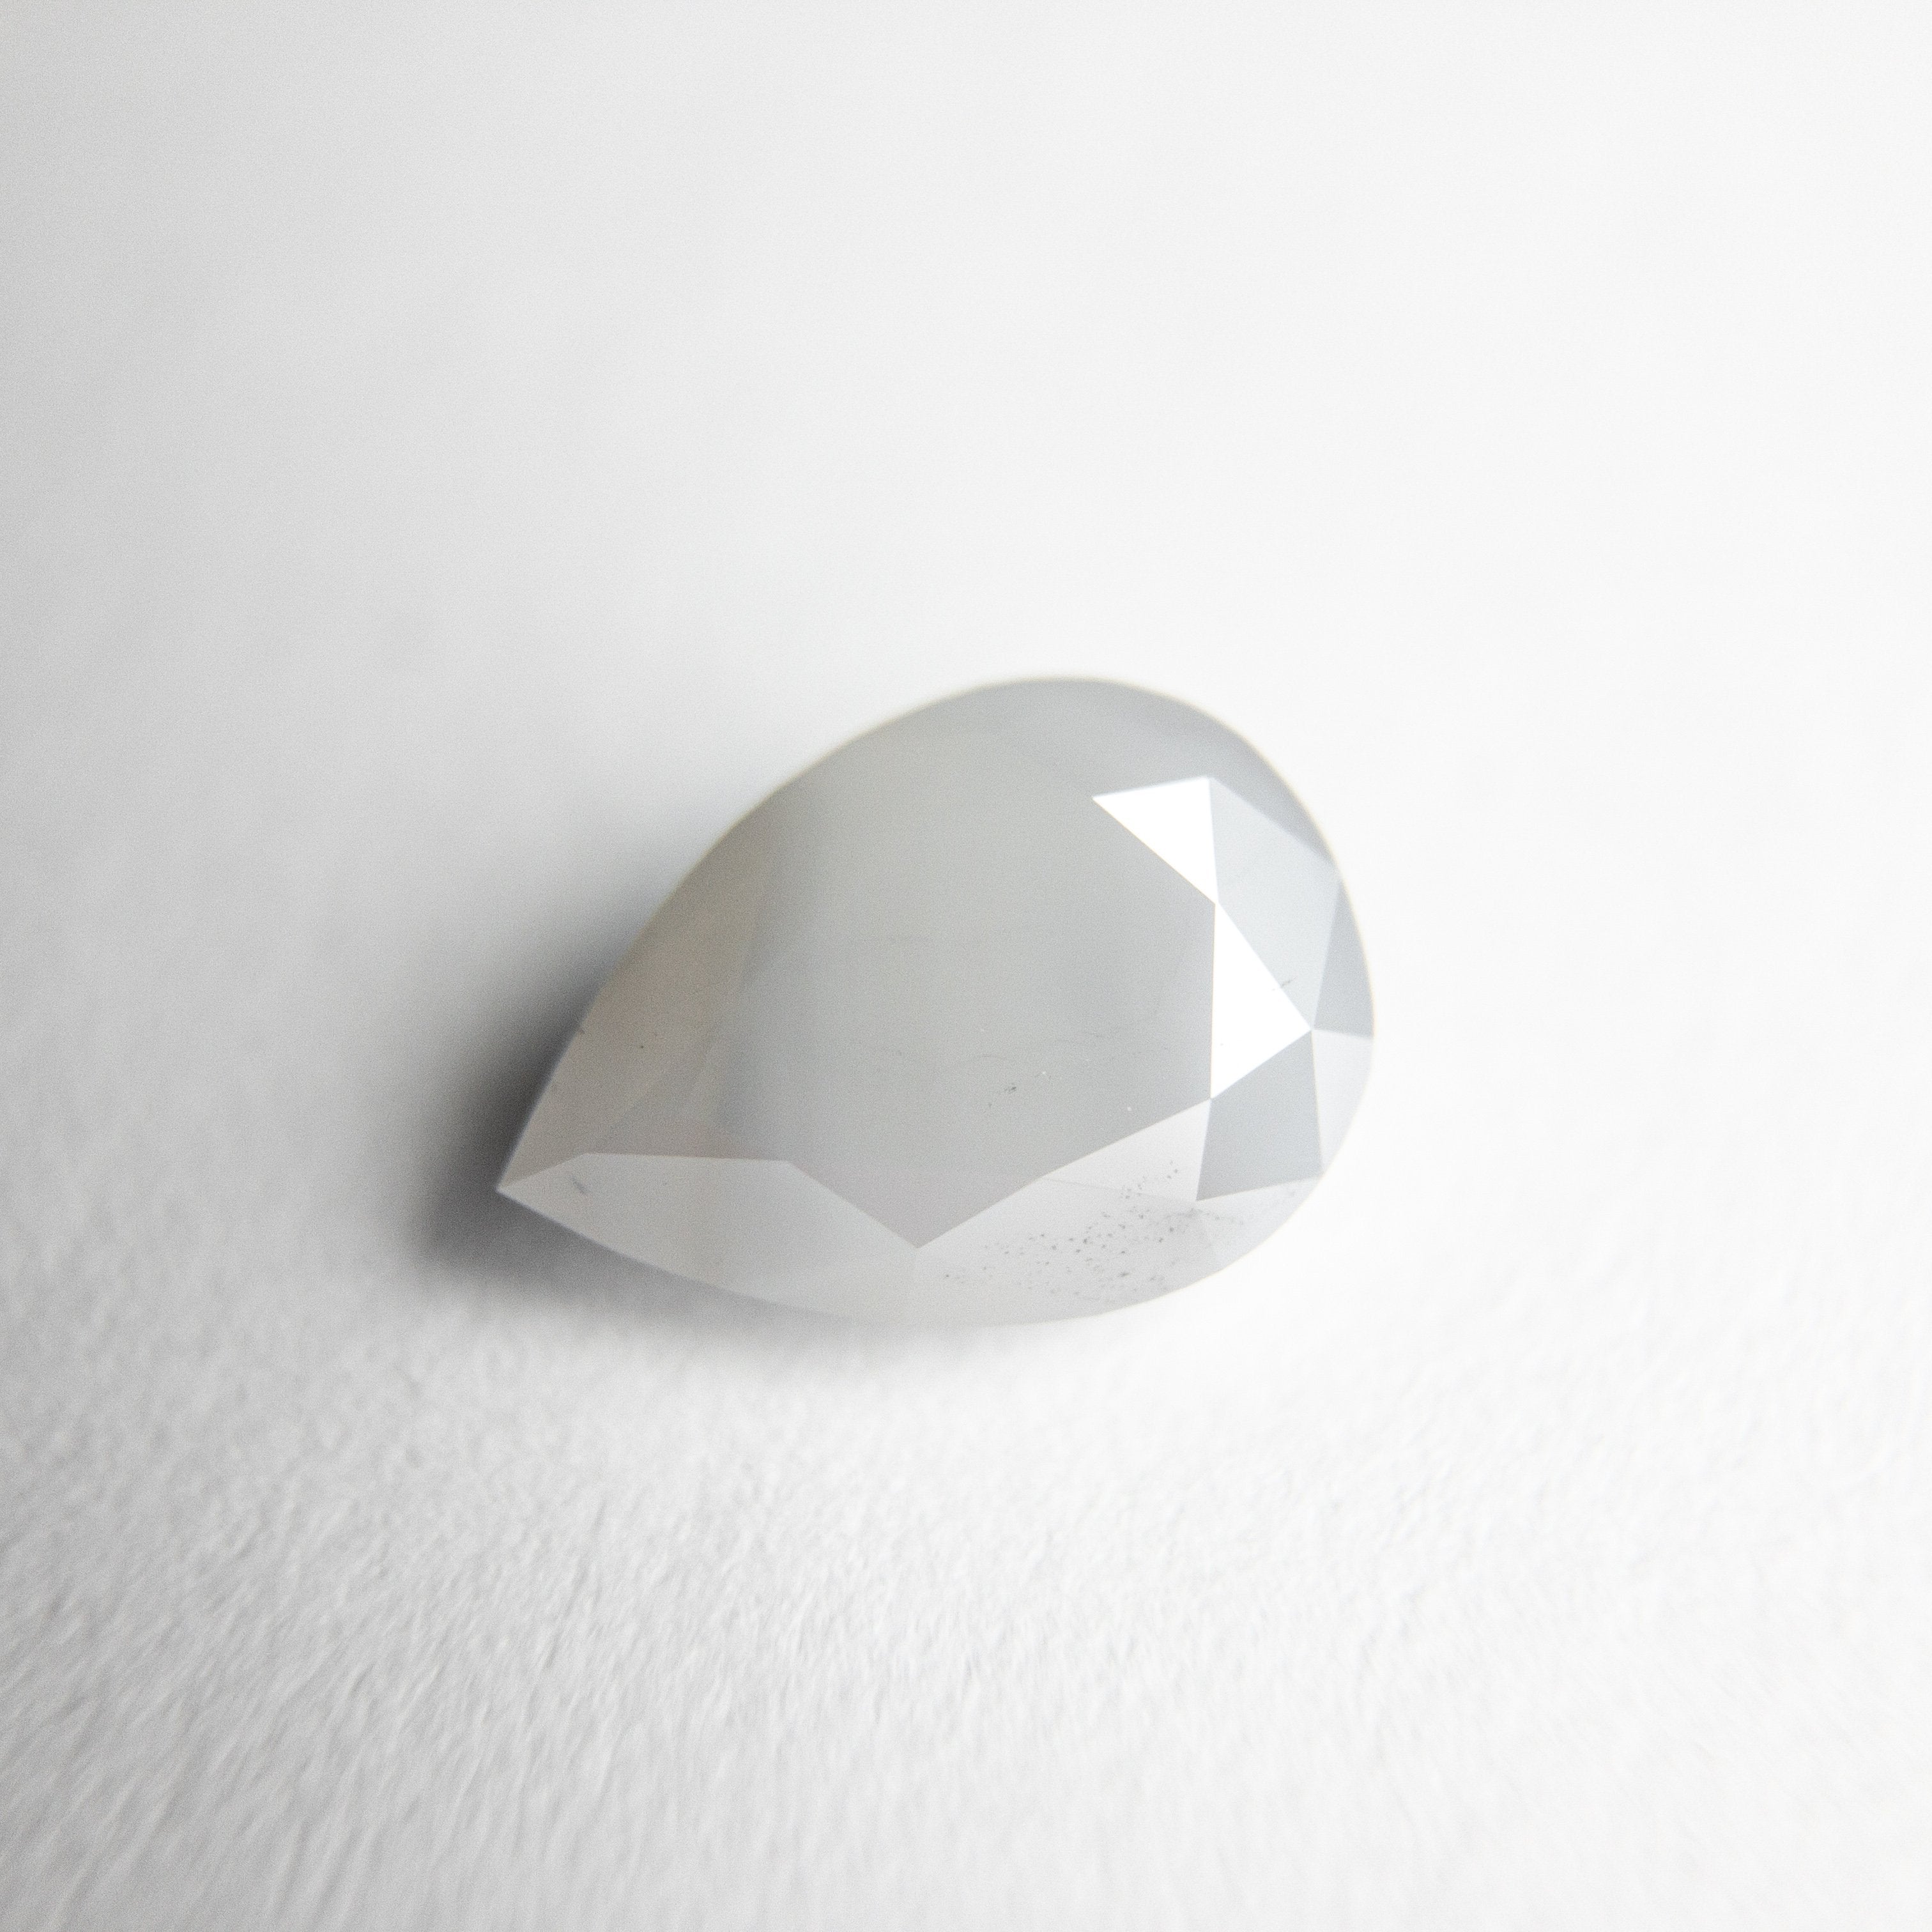 0.89ct 7.60x5.45x3.05mm Pear Double Cut 18399-04 HOLD D1877 2.4.21